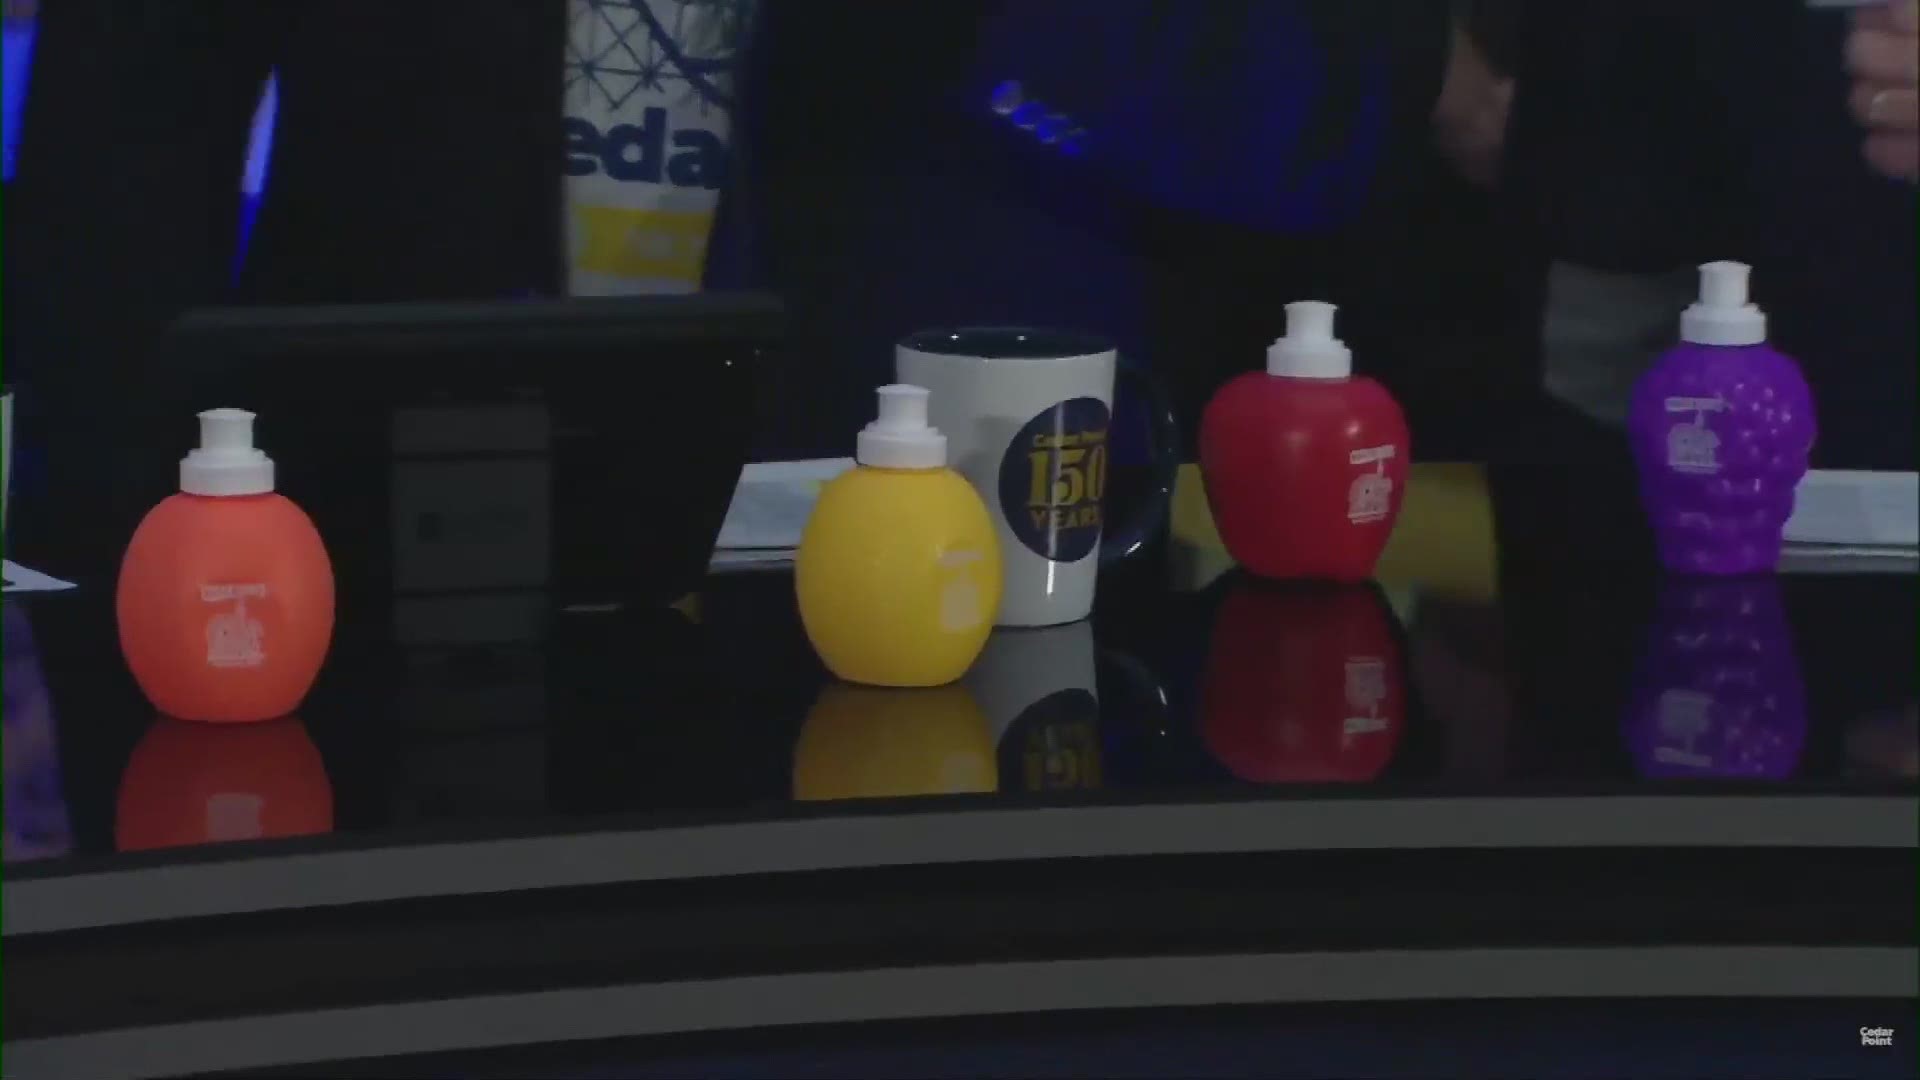 Remember these? Cedar Point is bringing back their fruit-shaped juice containers for the 2020 season in celebration of the park's 150th anniversary.